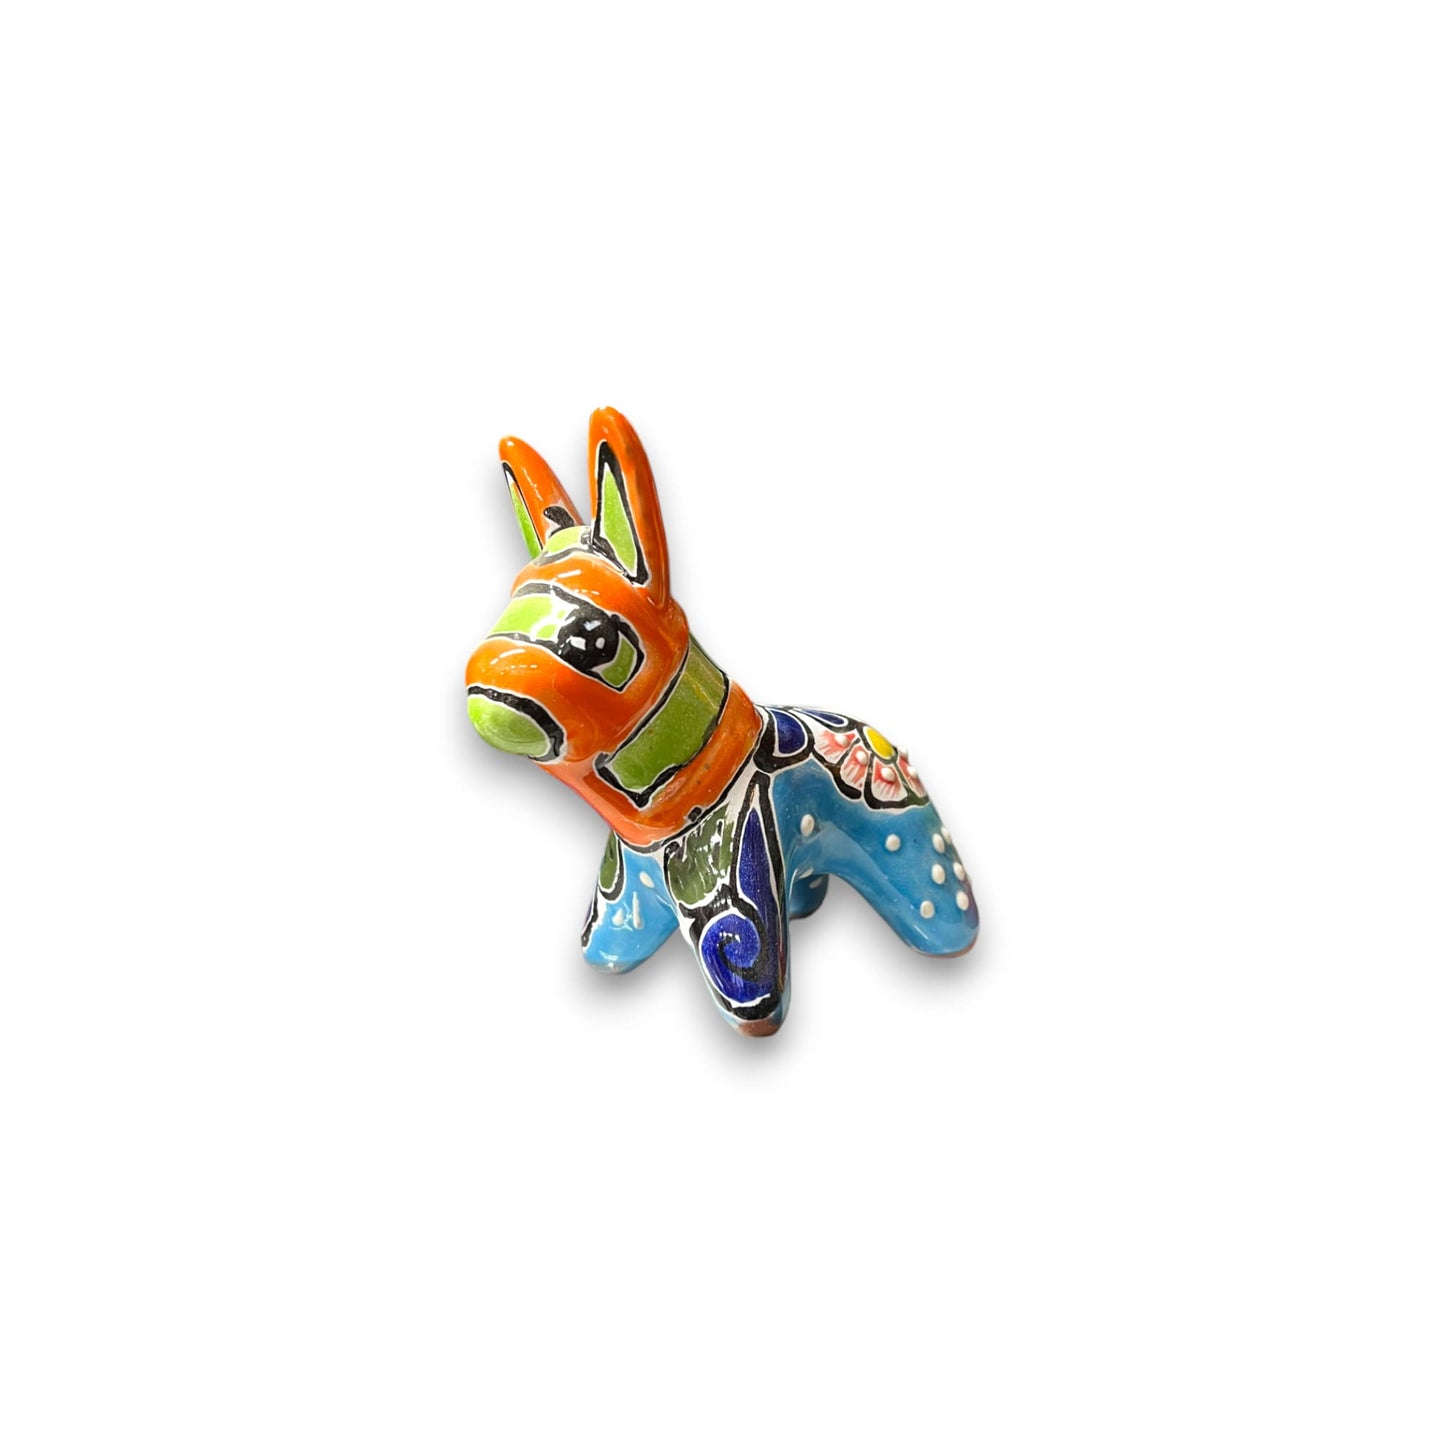 Colorful Talavera Donkey Figurine | Handcrafted Mexican Burro Pottery (Small)